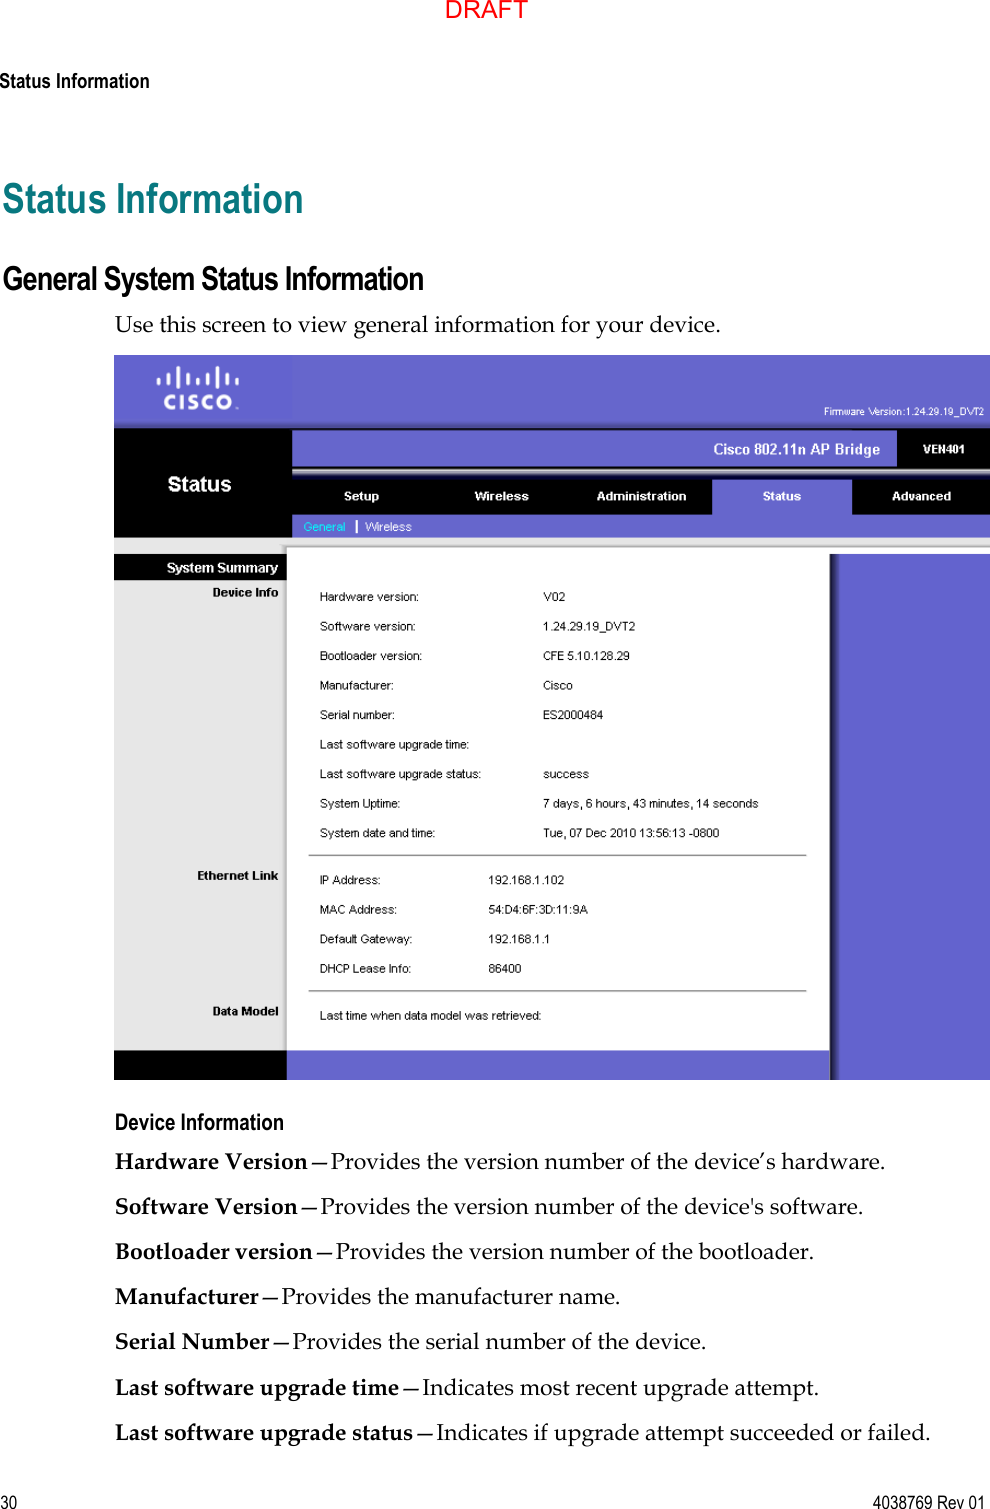  Status Information  30 4038769 Rev 01 Status Information General System Status Information Use this screen to view general information for your device.  Device Information Hardware Version—Provides the version number of the device’s hardware. Software Version—Provides the version number of the device&apos;s software. Bootloader version—Provides the version number of the bootloader. Manufacturer—Provides the manufacturer name. Serial Number—Provides the serial number of the device. Last software upgrade time—Indicates most recent upgrade attempt. Last software upgrade status—Indicates if upgrade attempt succeeded or failed. DRAFT